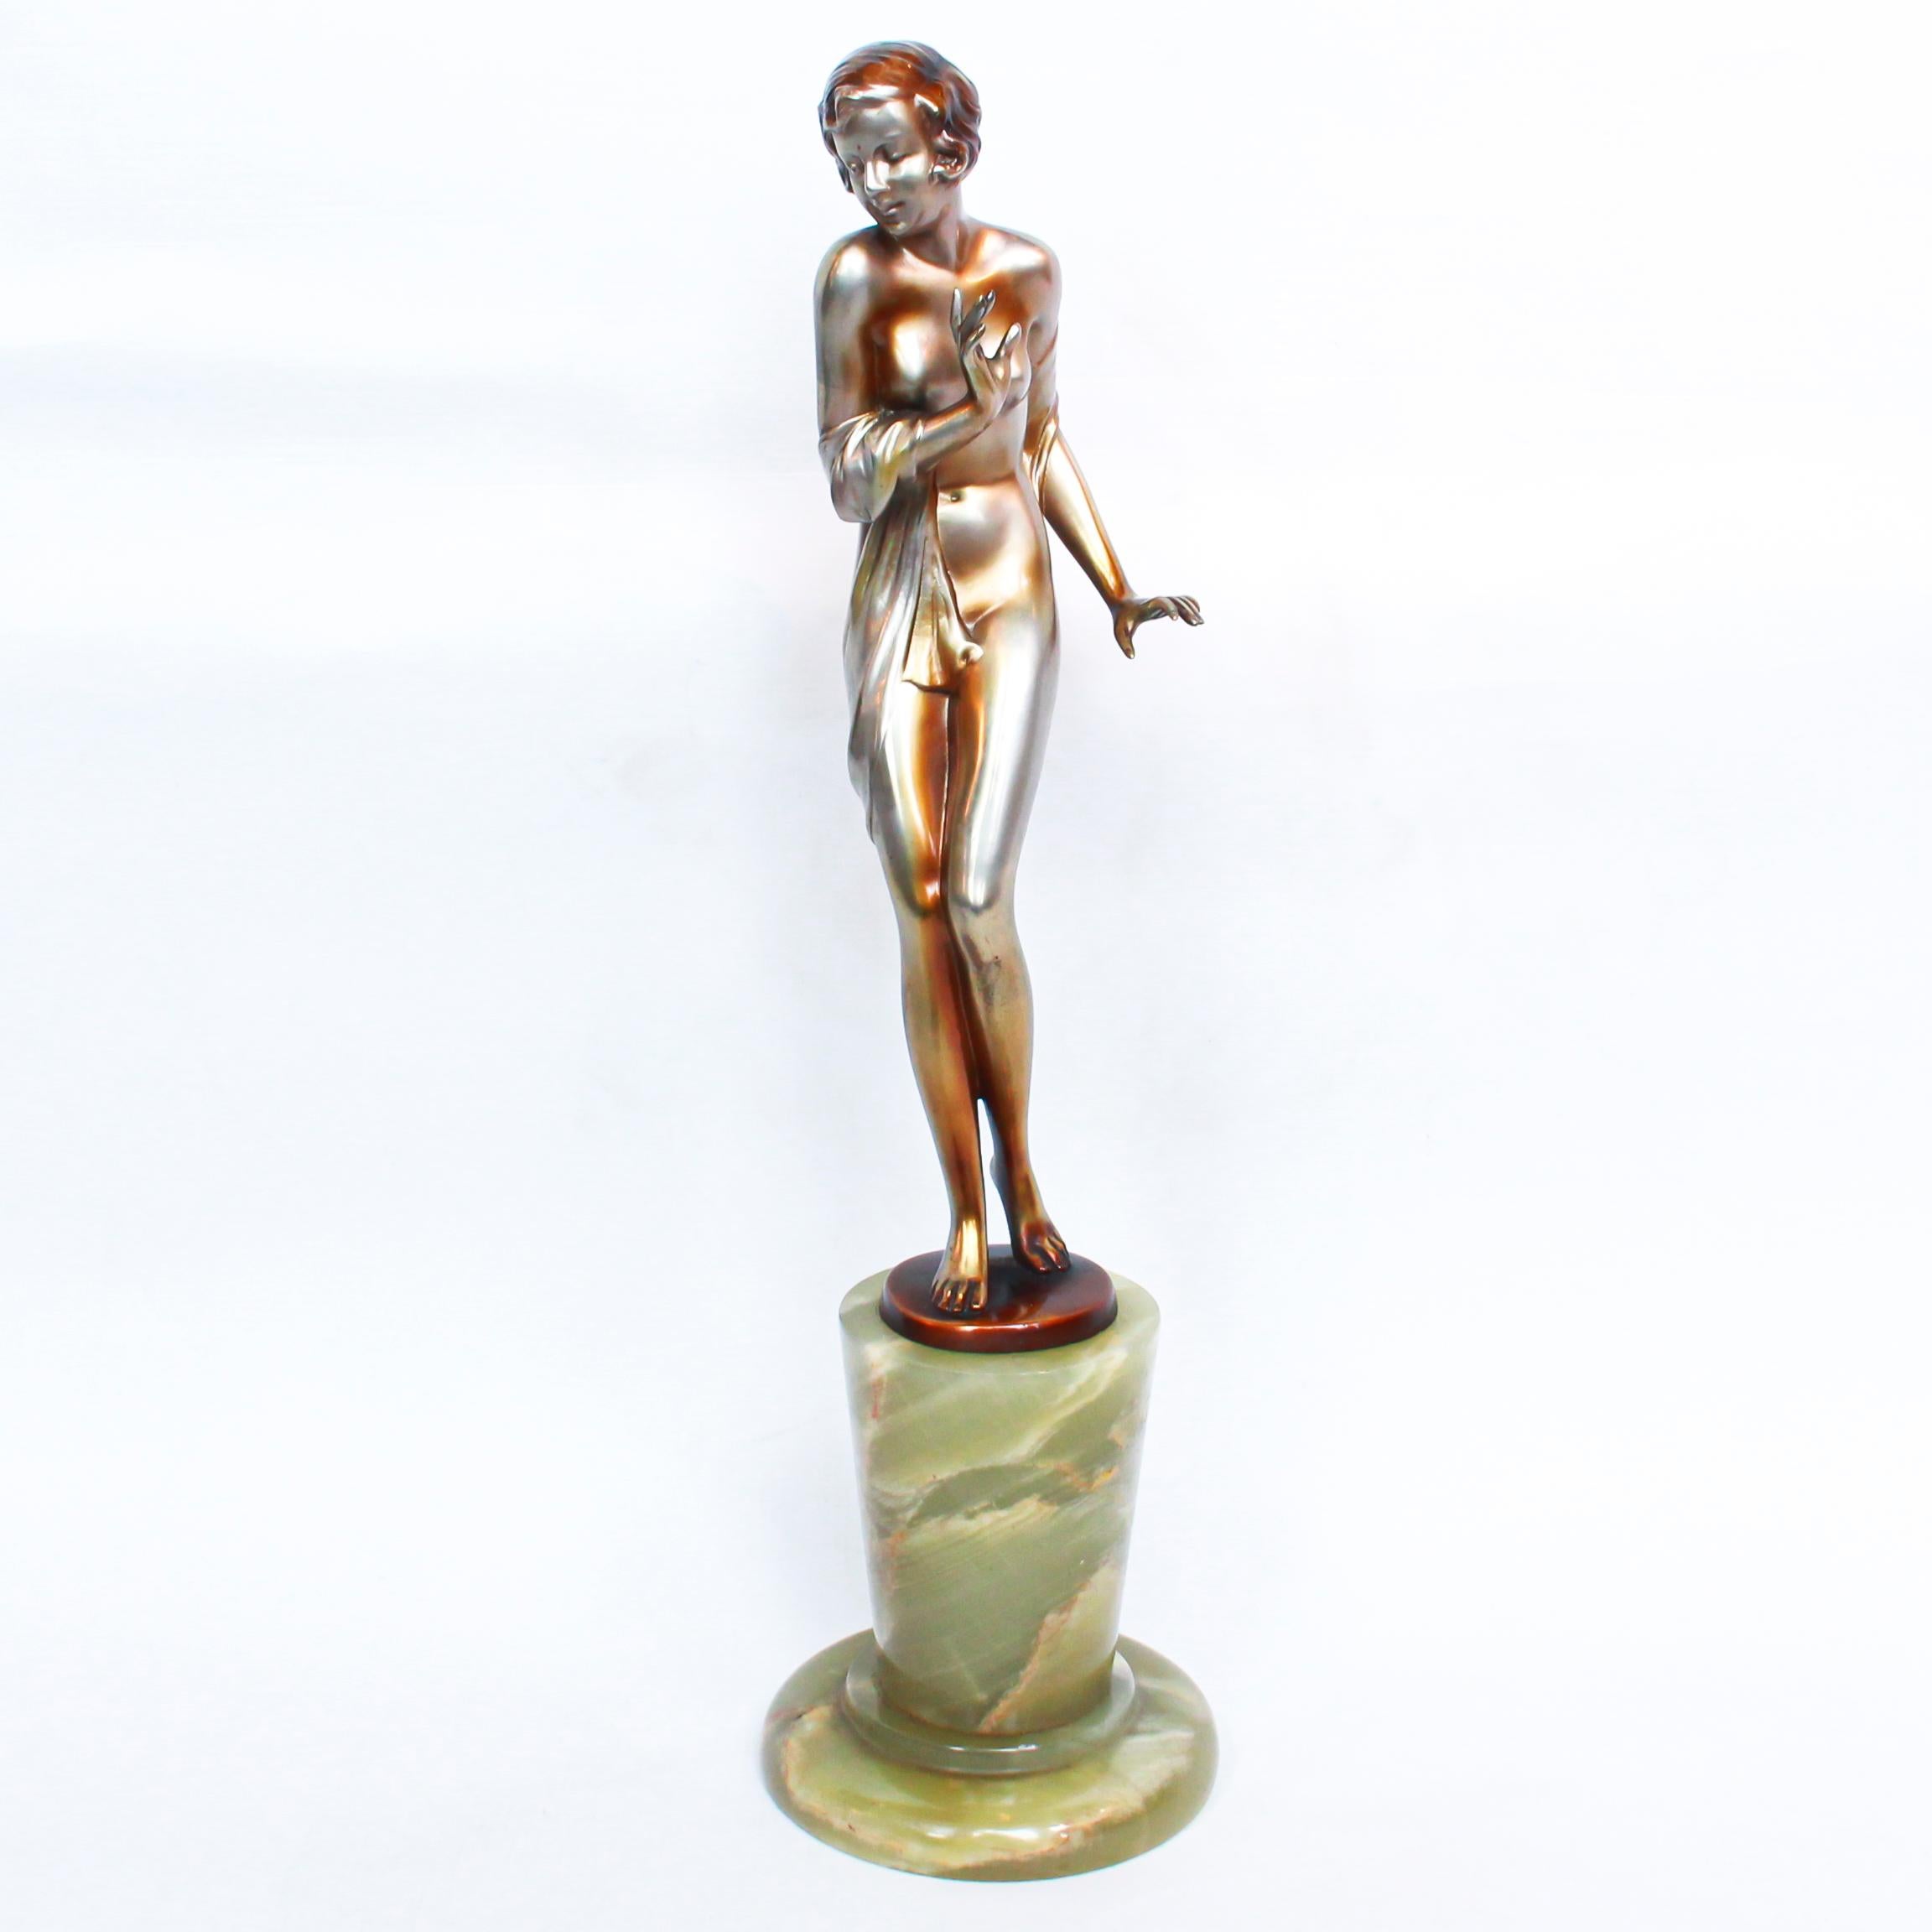 An Art Deco, cold painted silver and enamel bronze figure of a young woman wrapped in a shawl with fine color and detail, raised on a stepped conical green onyx base. Signed Lorenzl to cast.

Josef Lorenzl , born in 1892 began his career at a